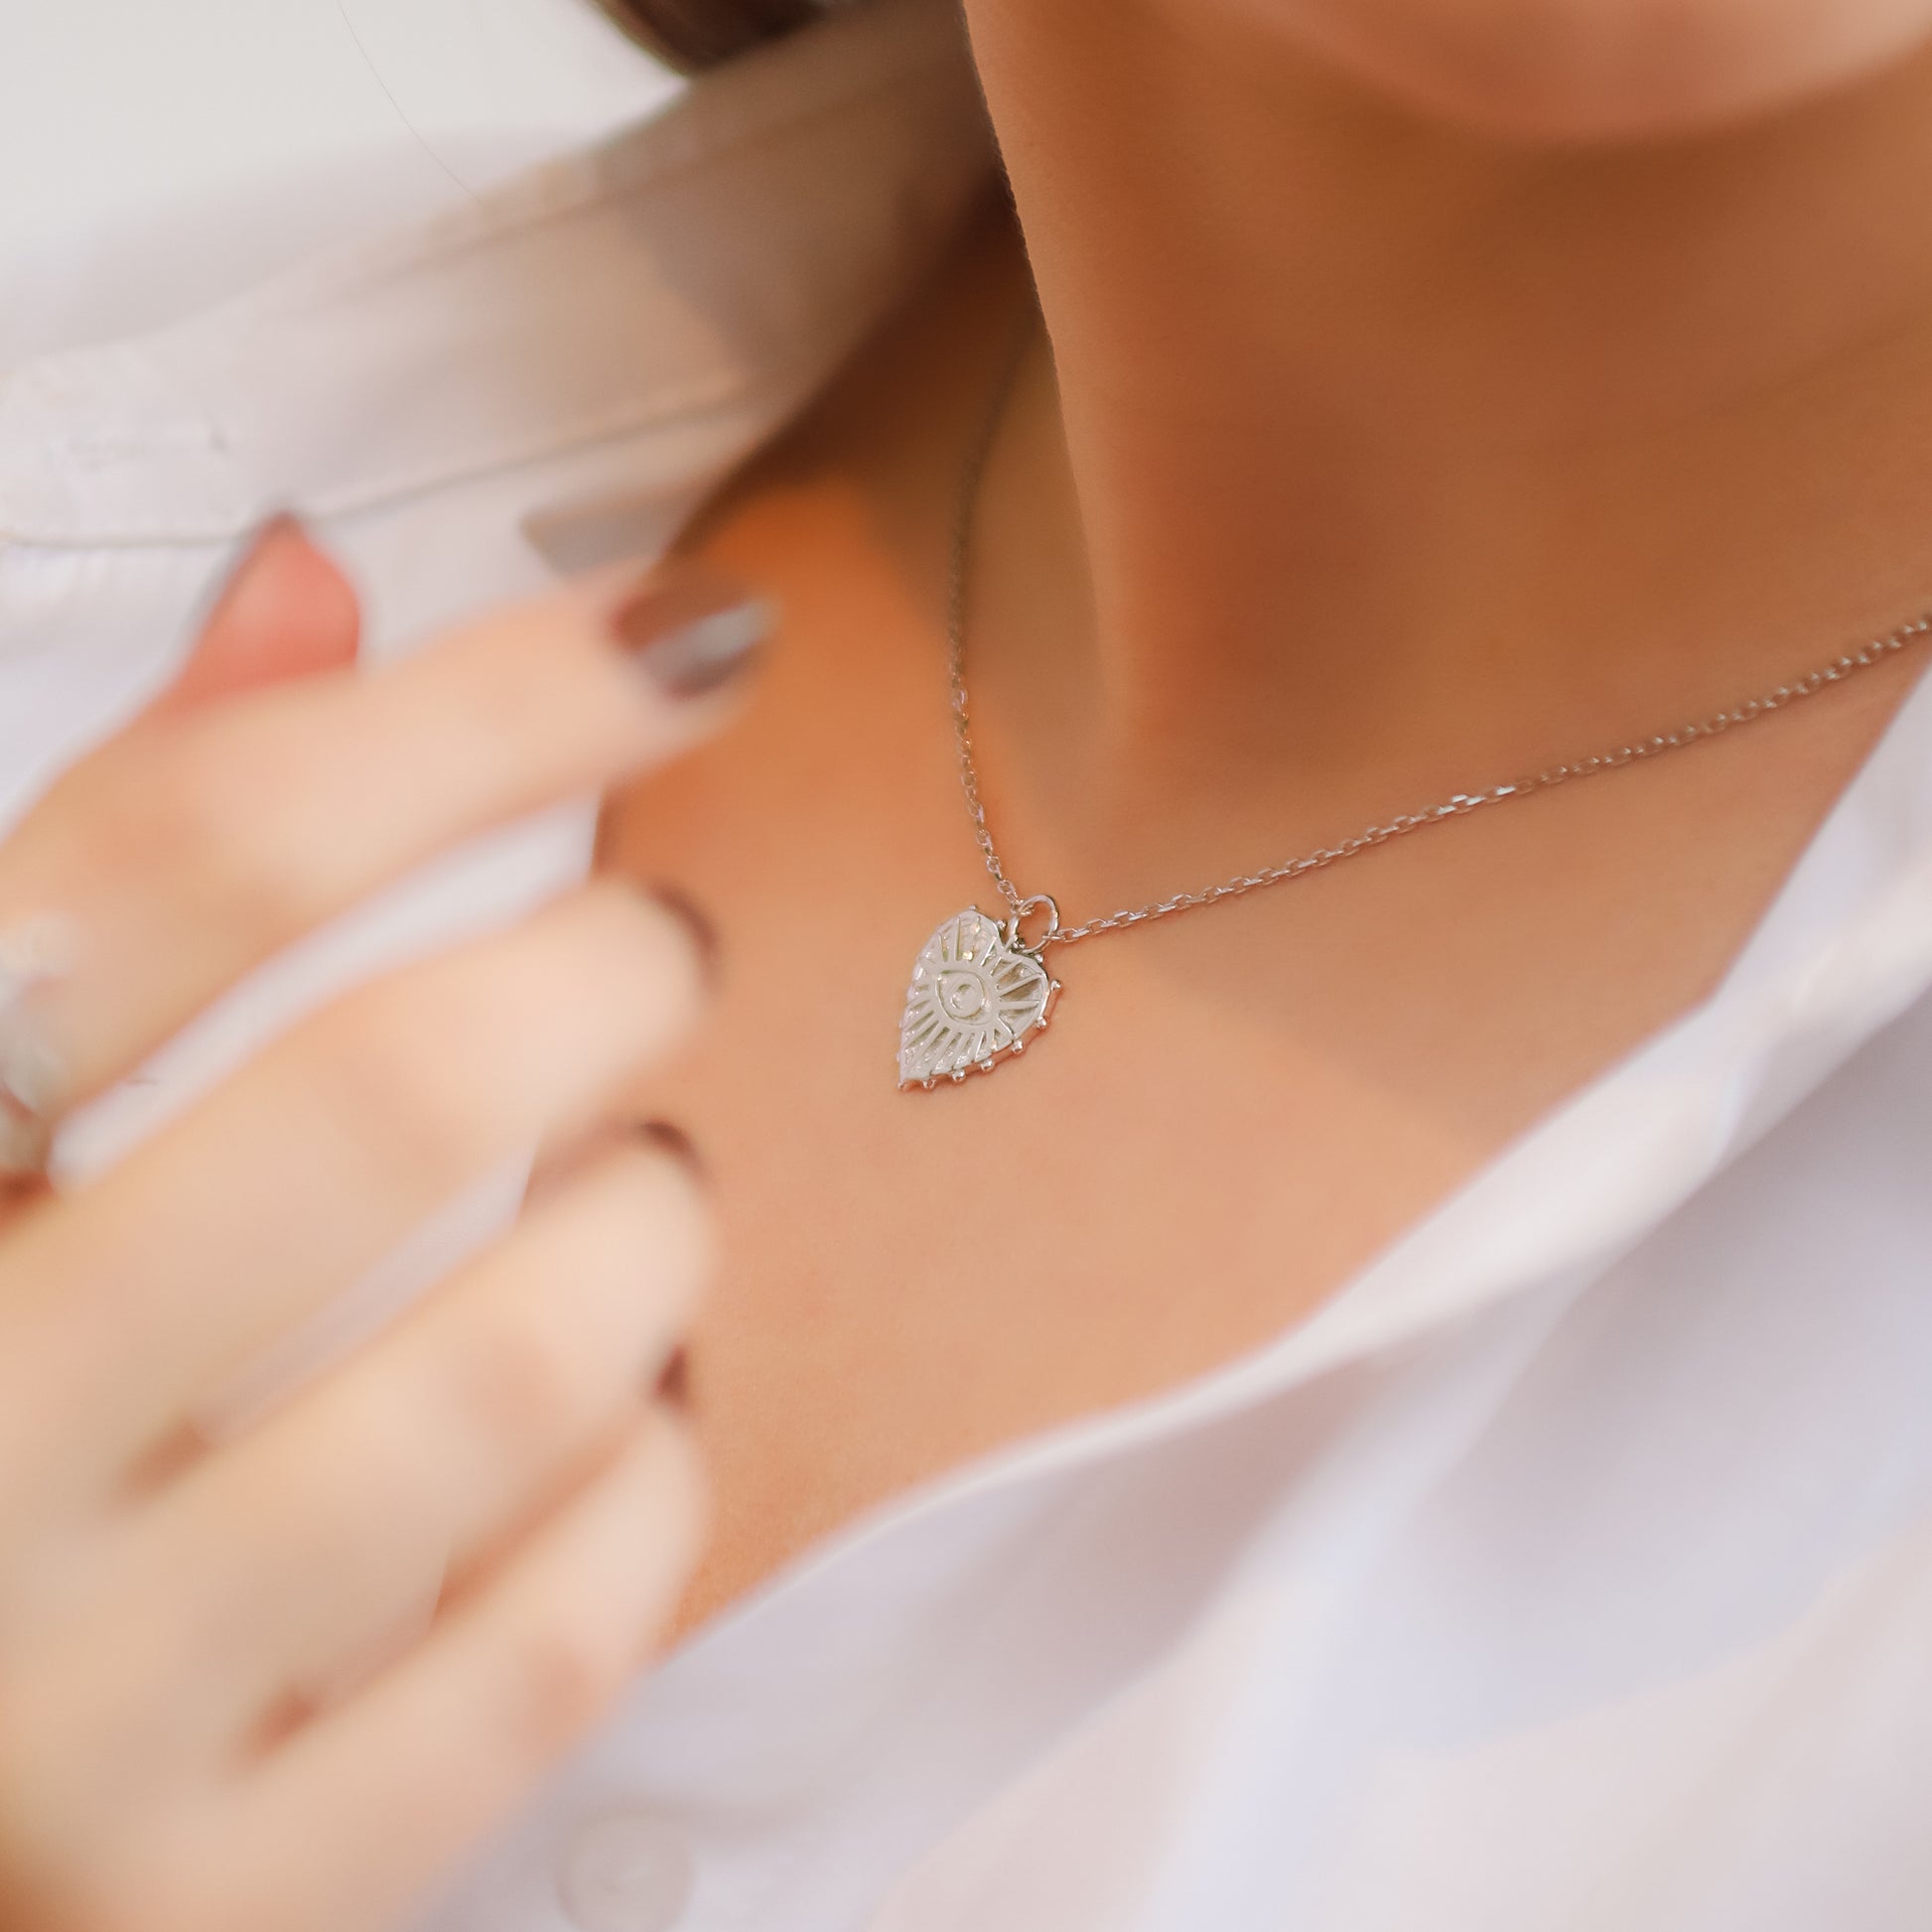 Ines Heart Eye Pendant Necklace | 925 Sterling Silver